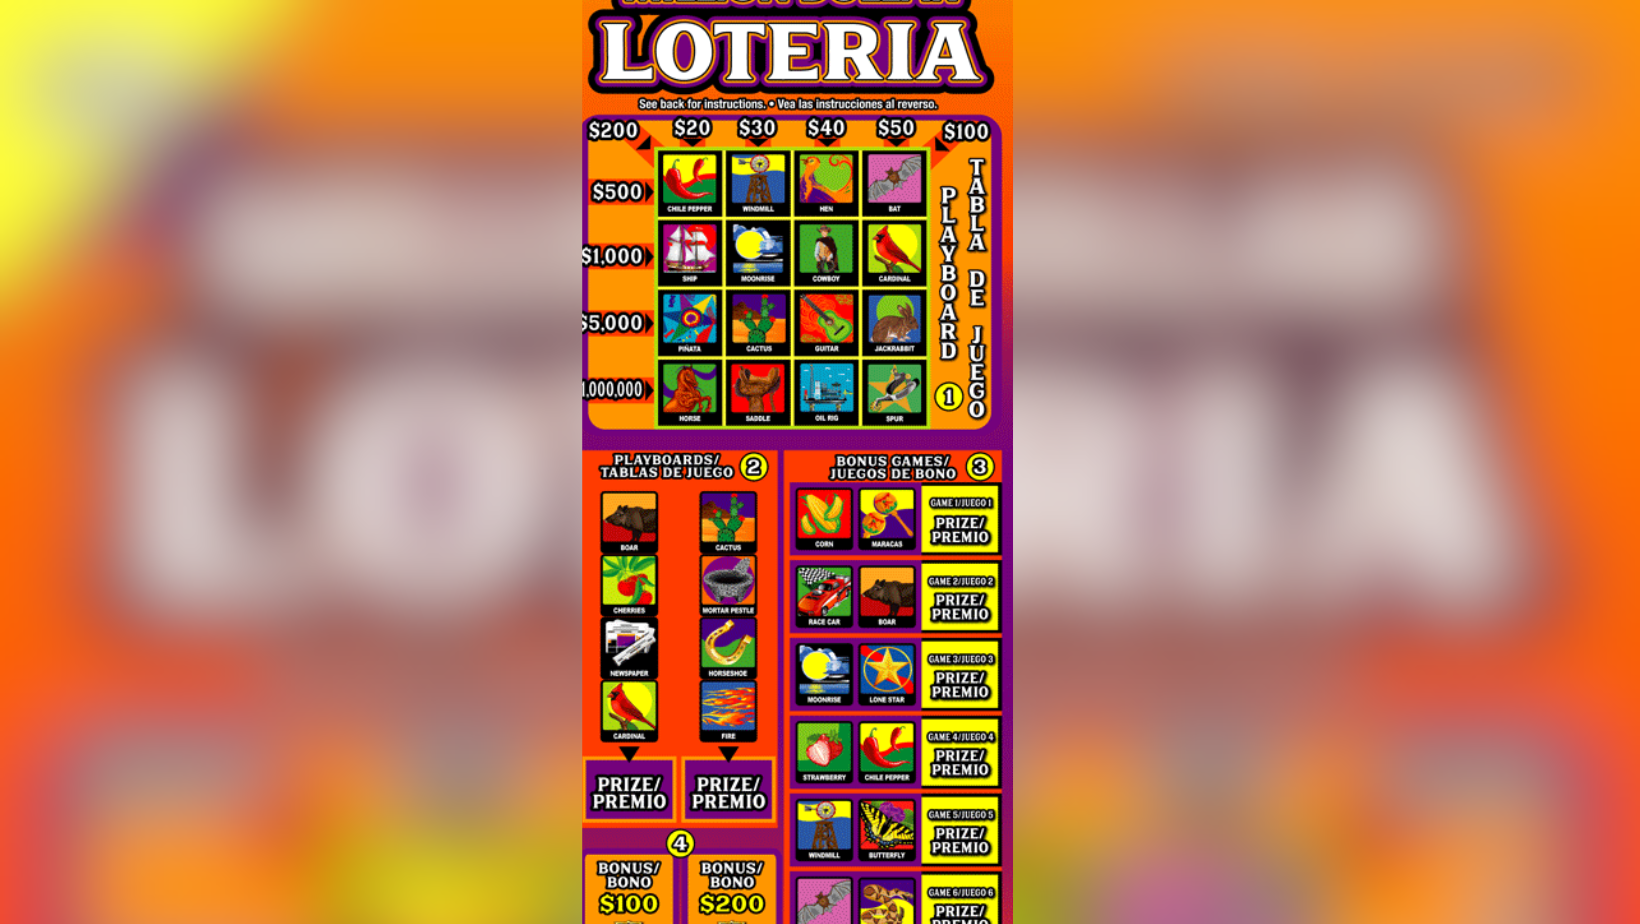 Sulphur Springs resident becomes new millionaire with winning scratch-off  ticket